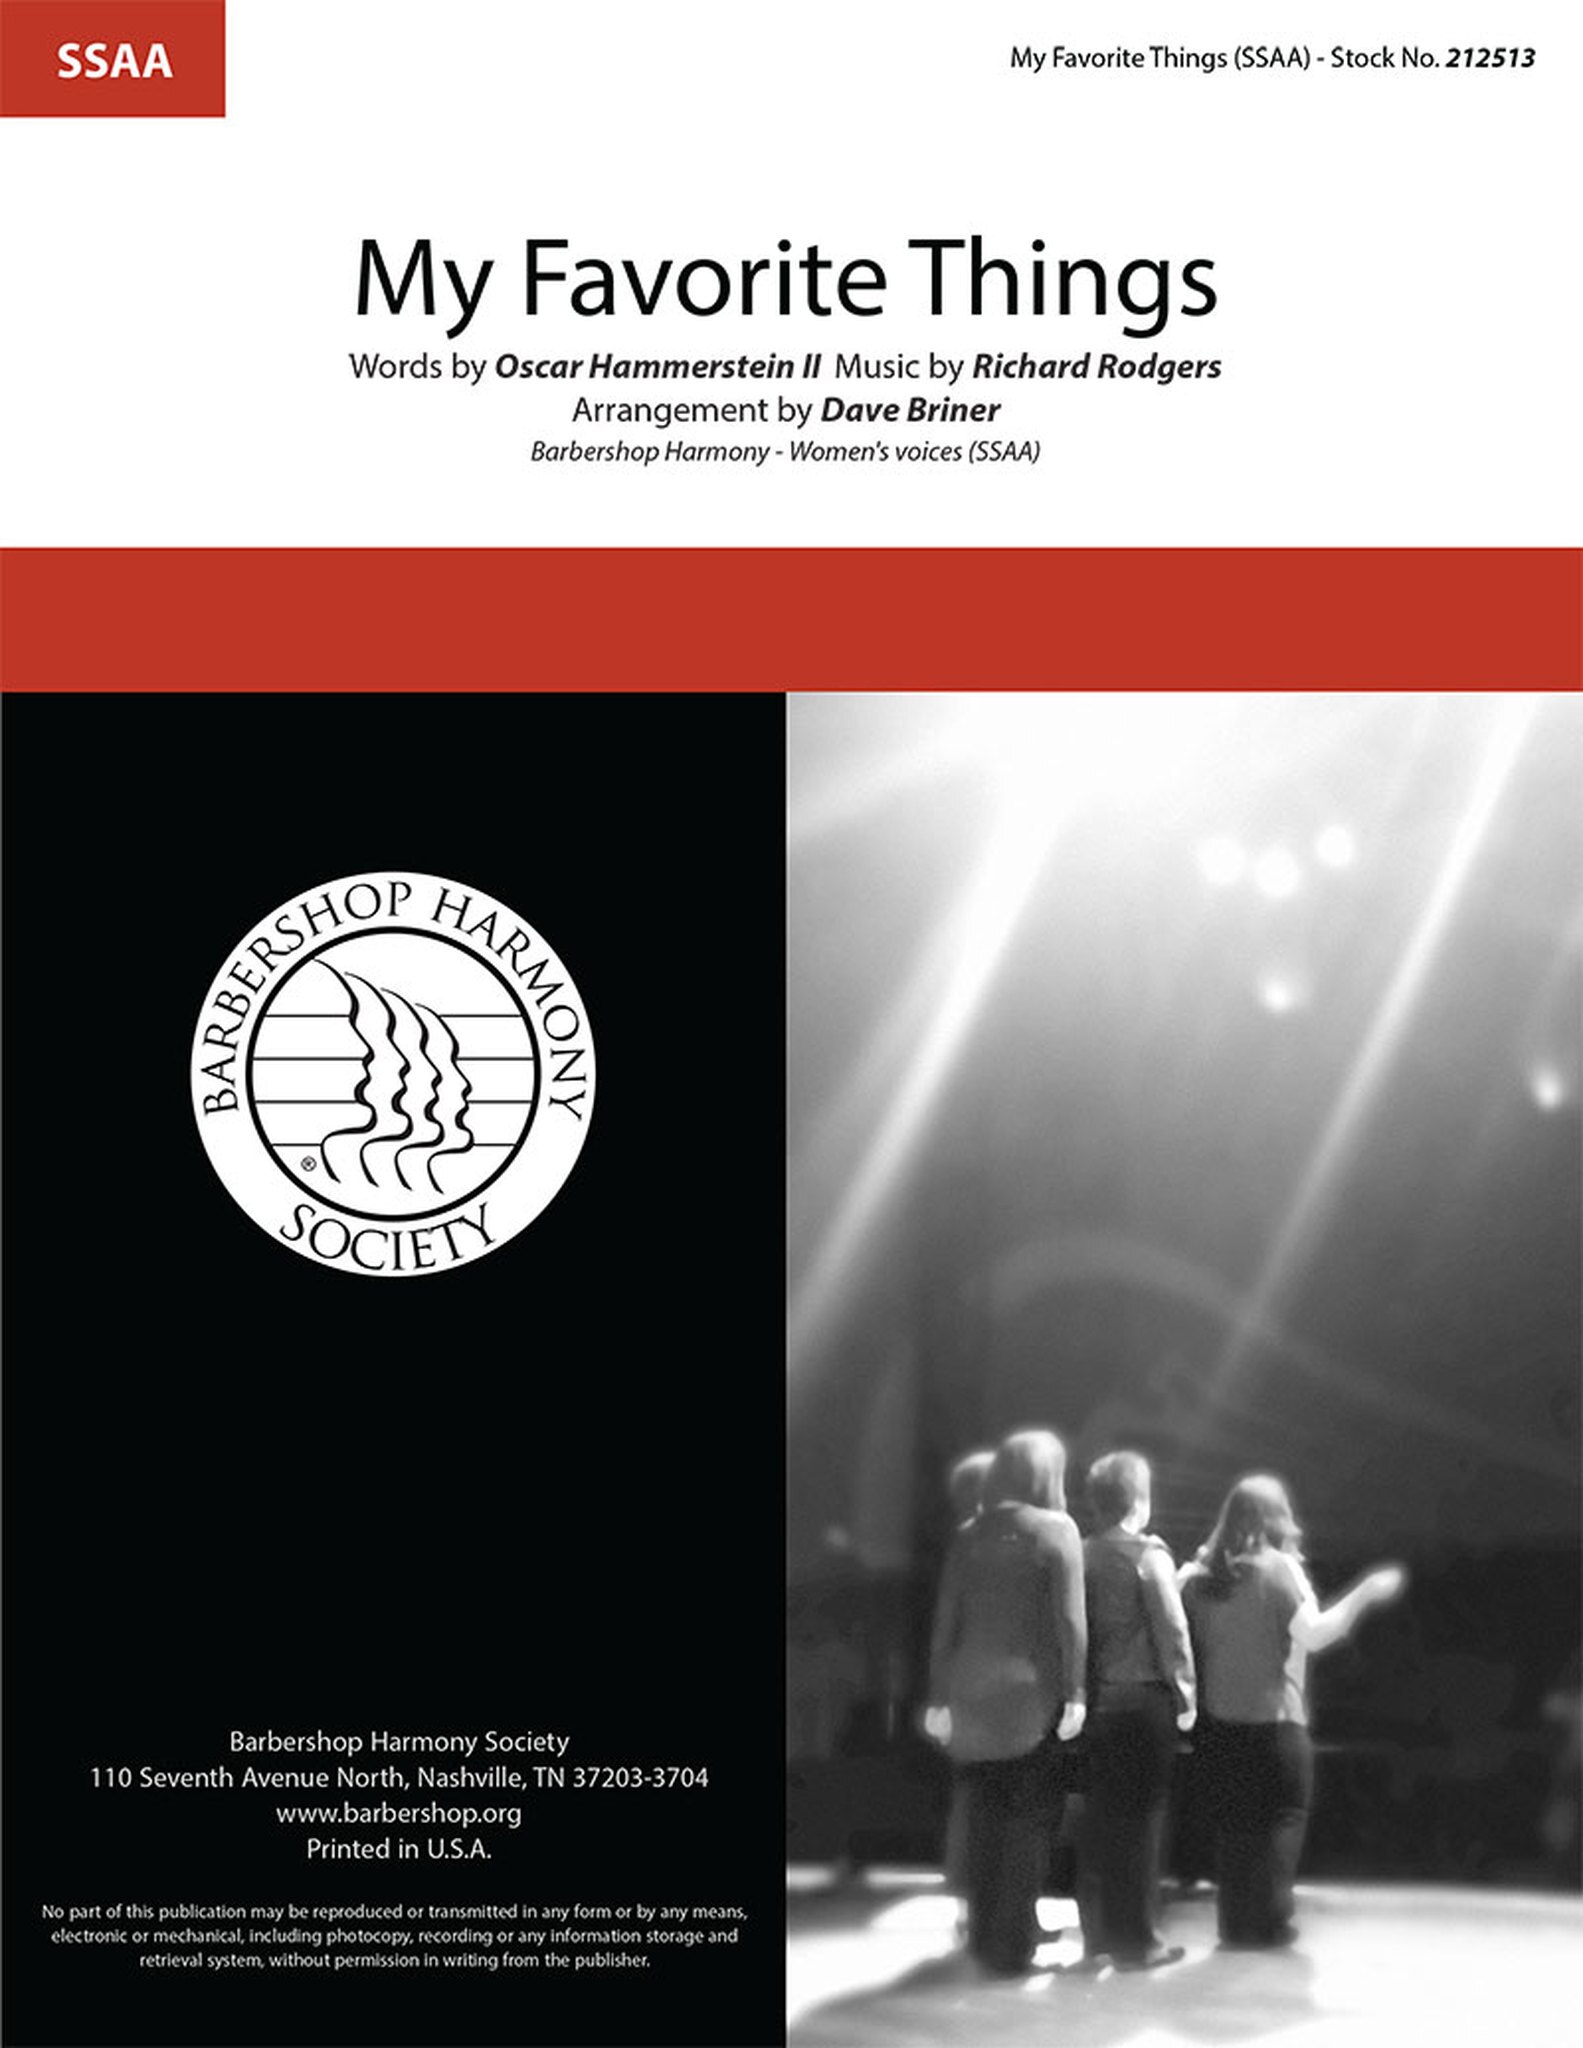 My Favorite Things : SSAA : Dave Briner : Richard Rodgers : The Sound Of Music : Digital : 212513